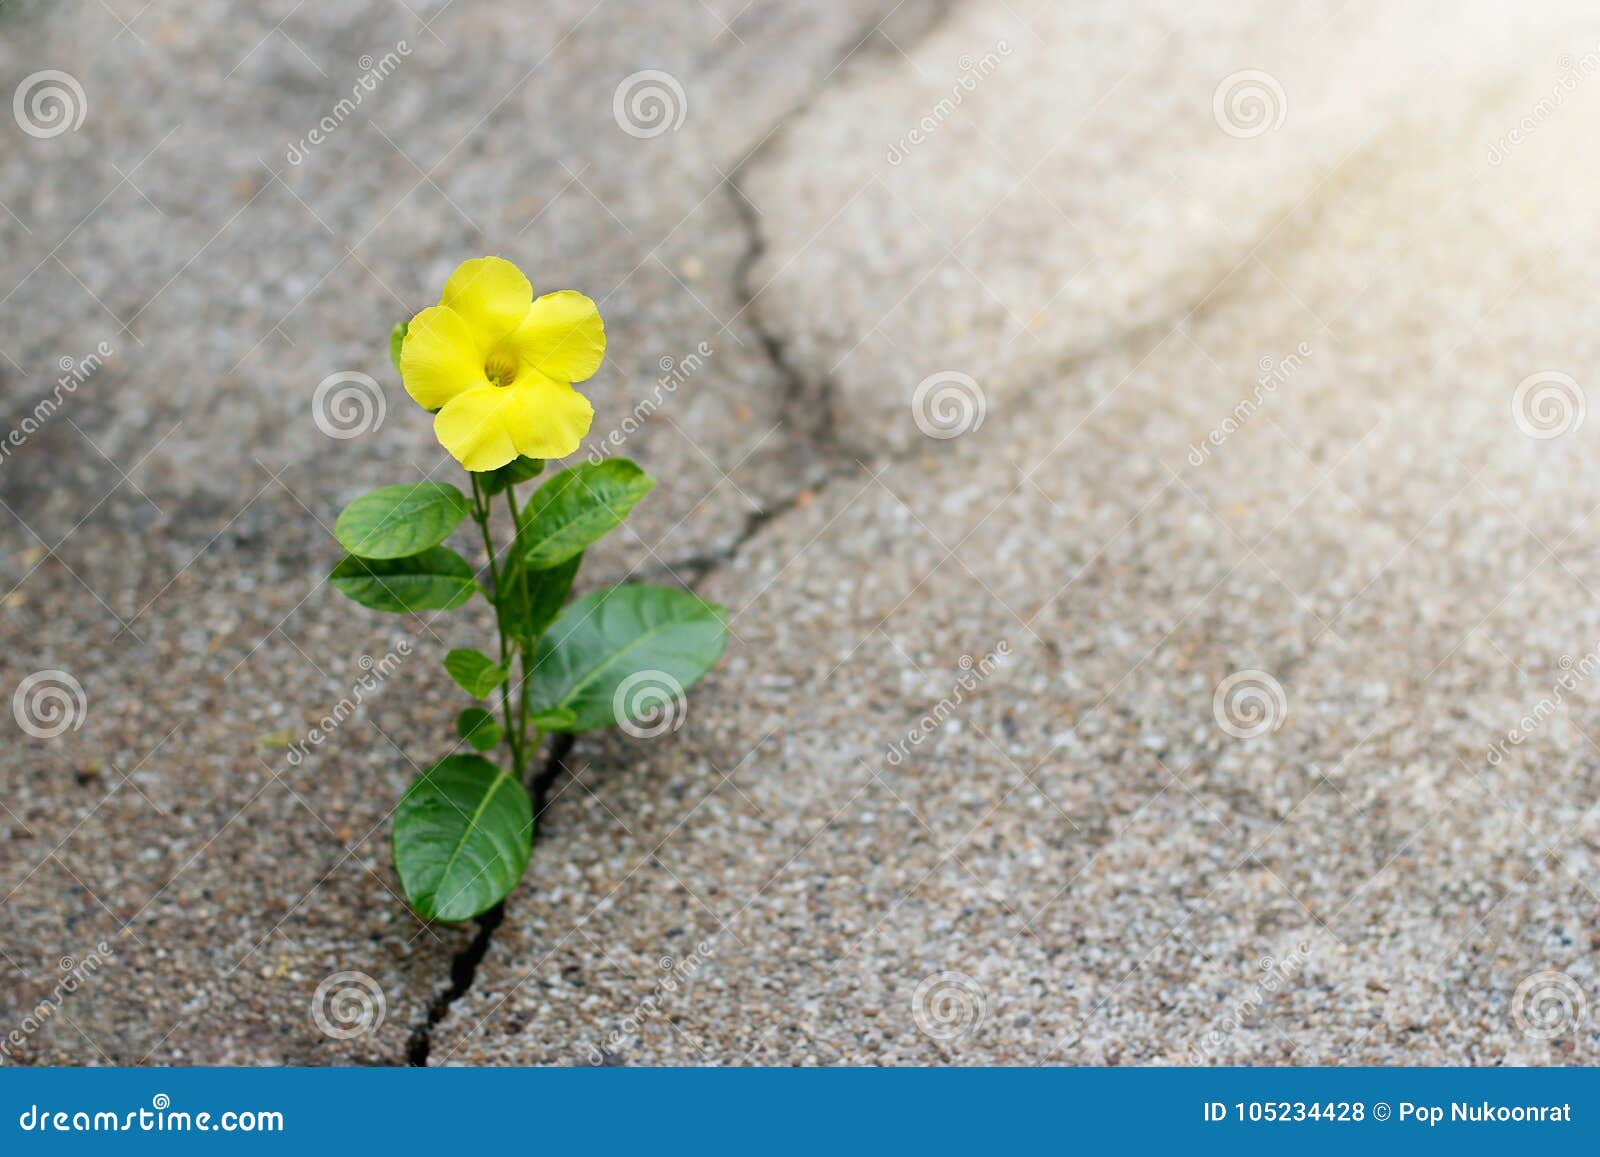 yellow flower growing on crack street, hope concept